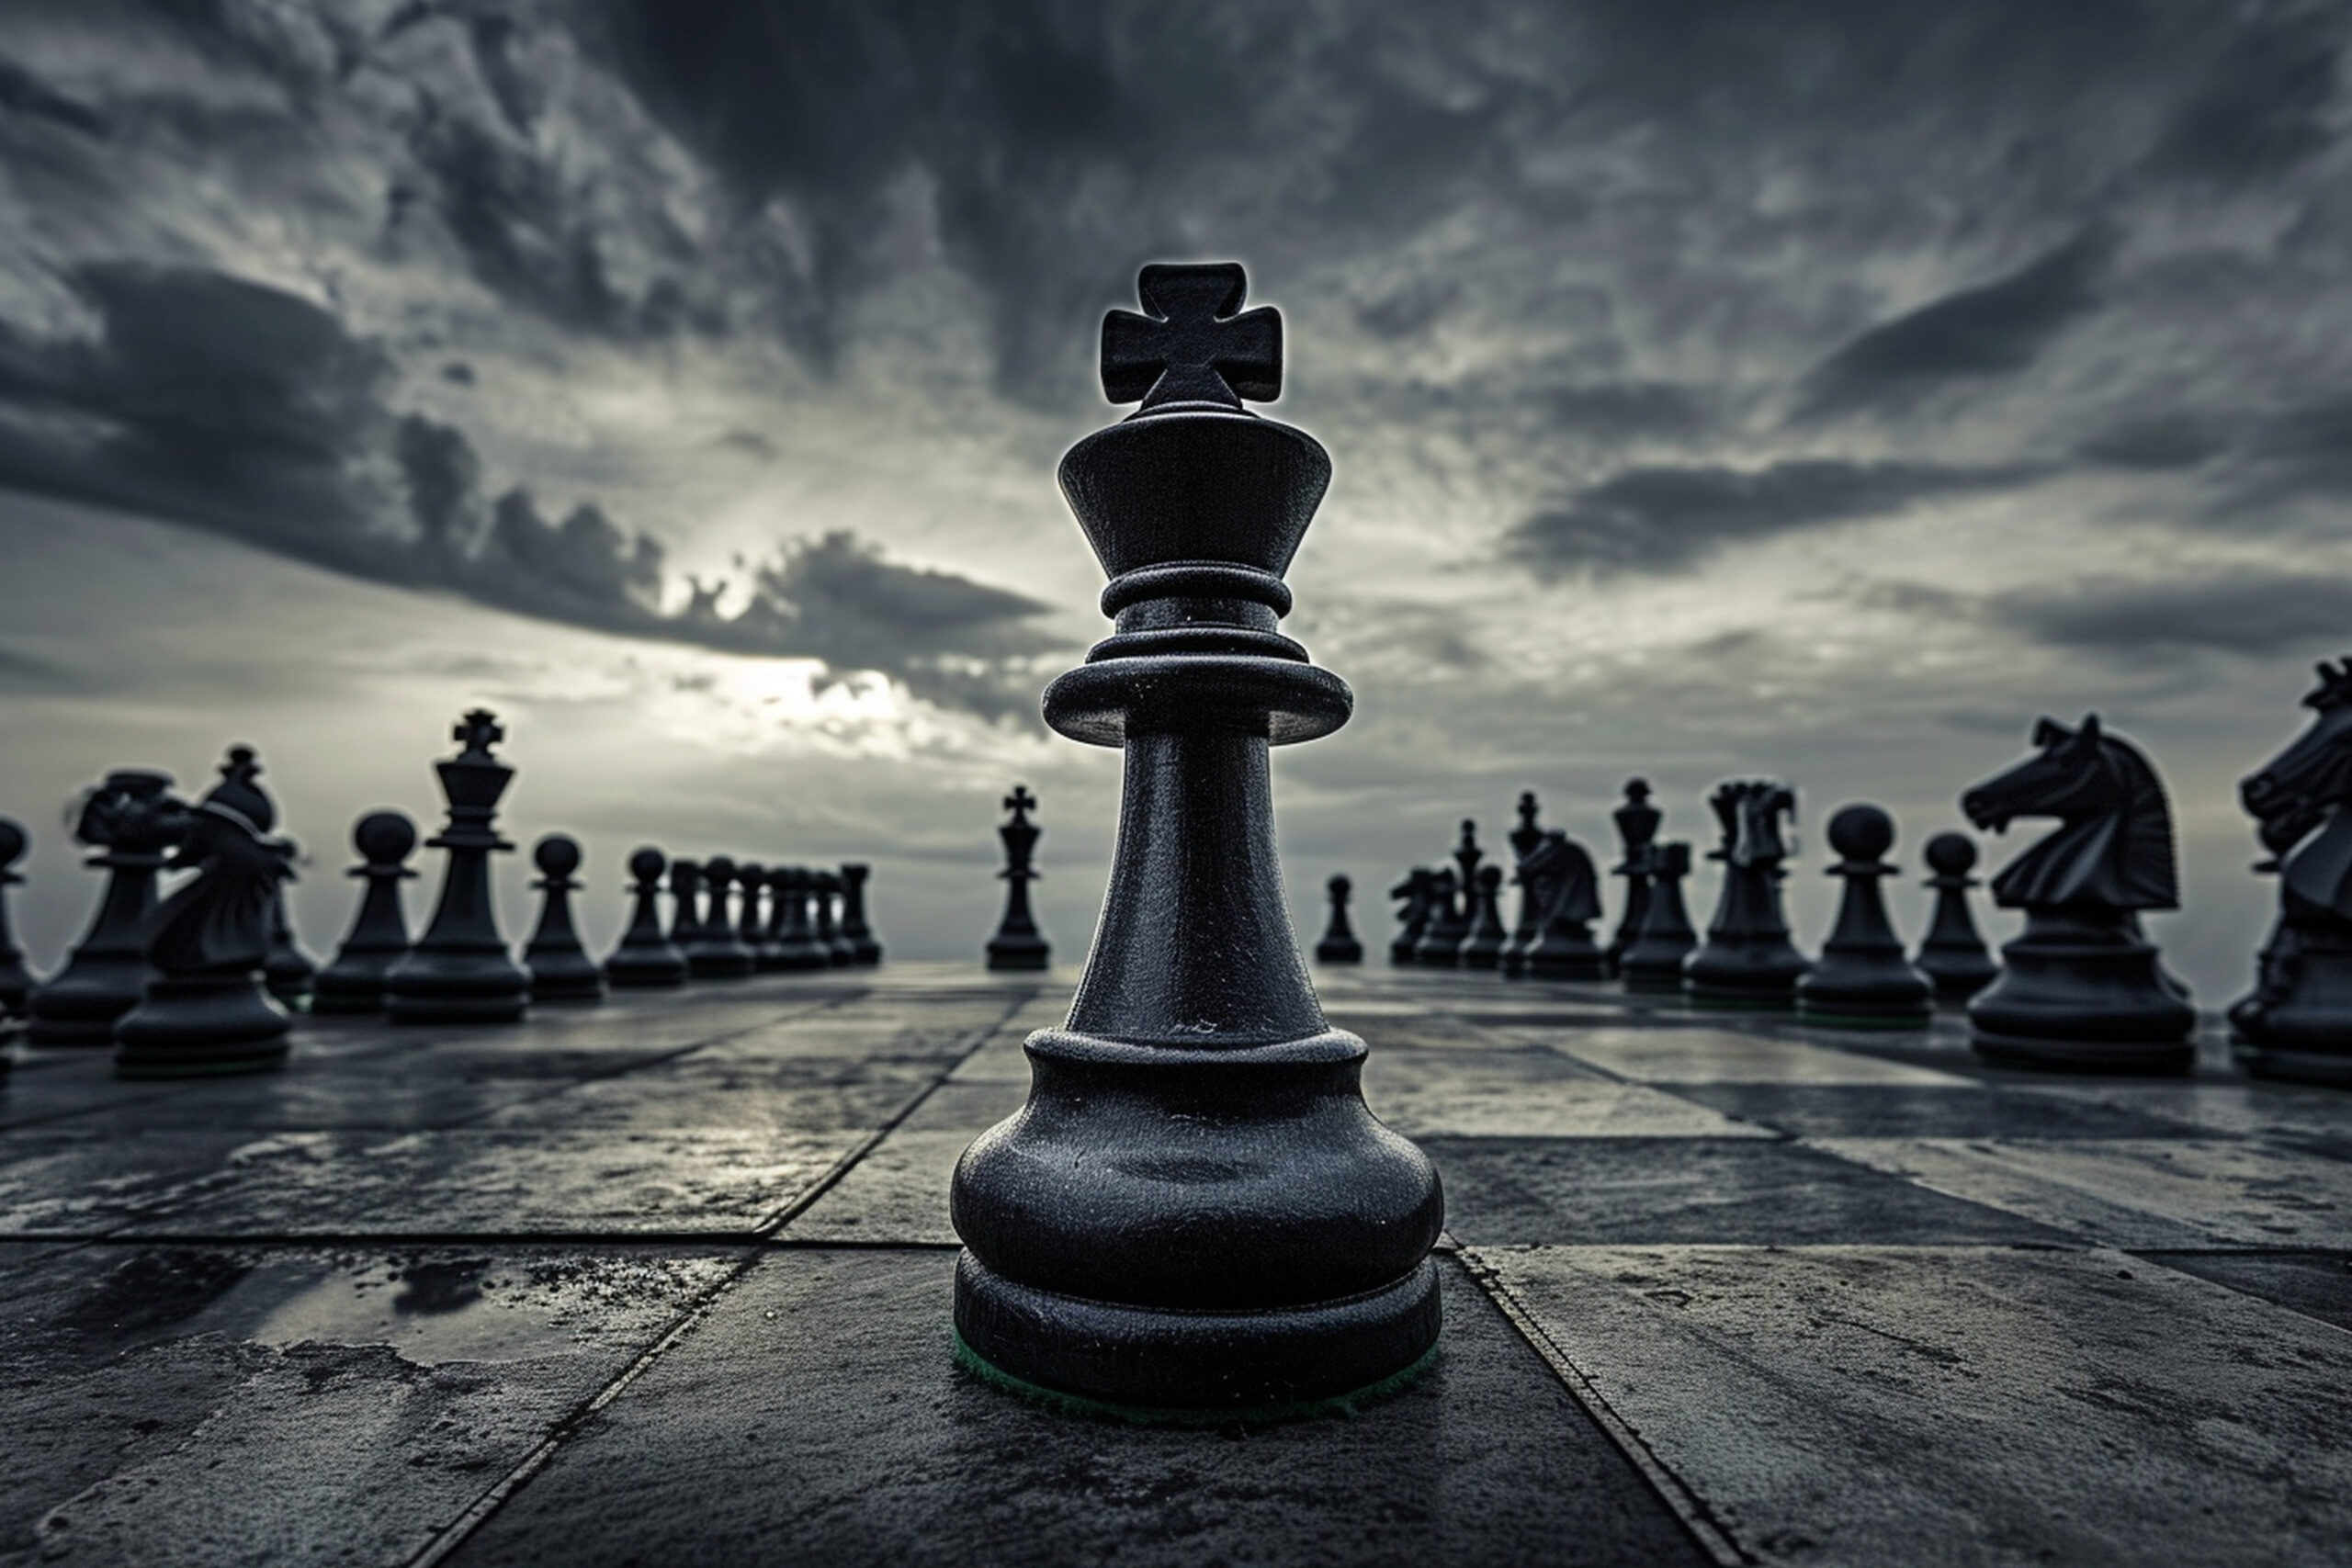 Massive king chess piece on a chessboard with gray skies in background